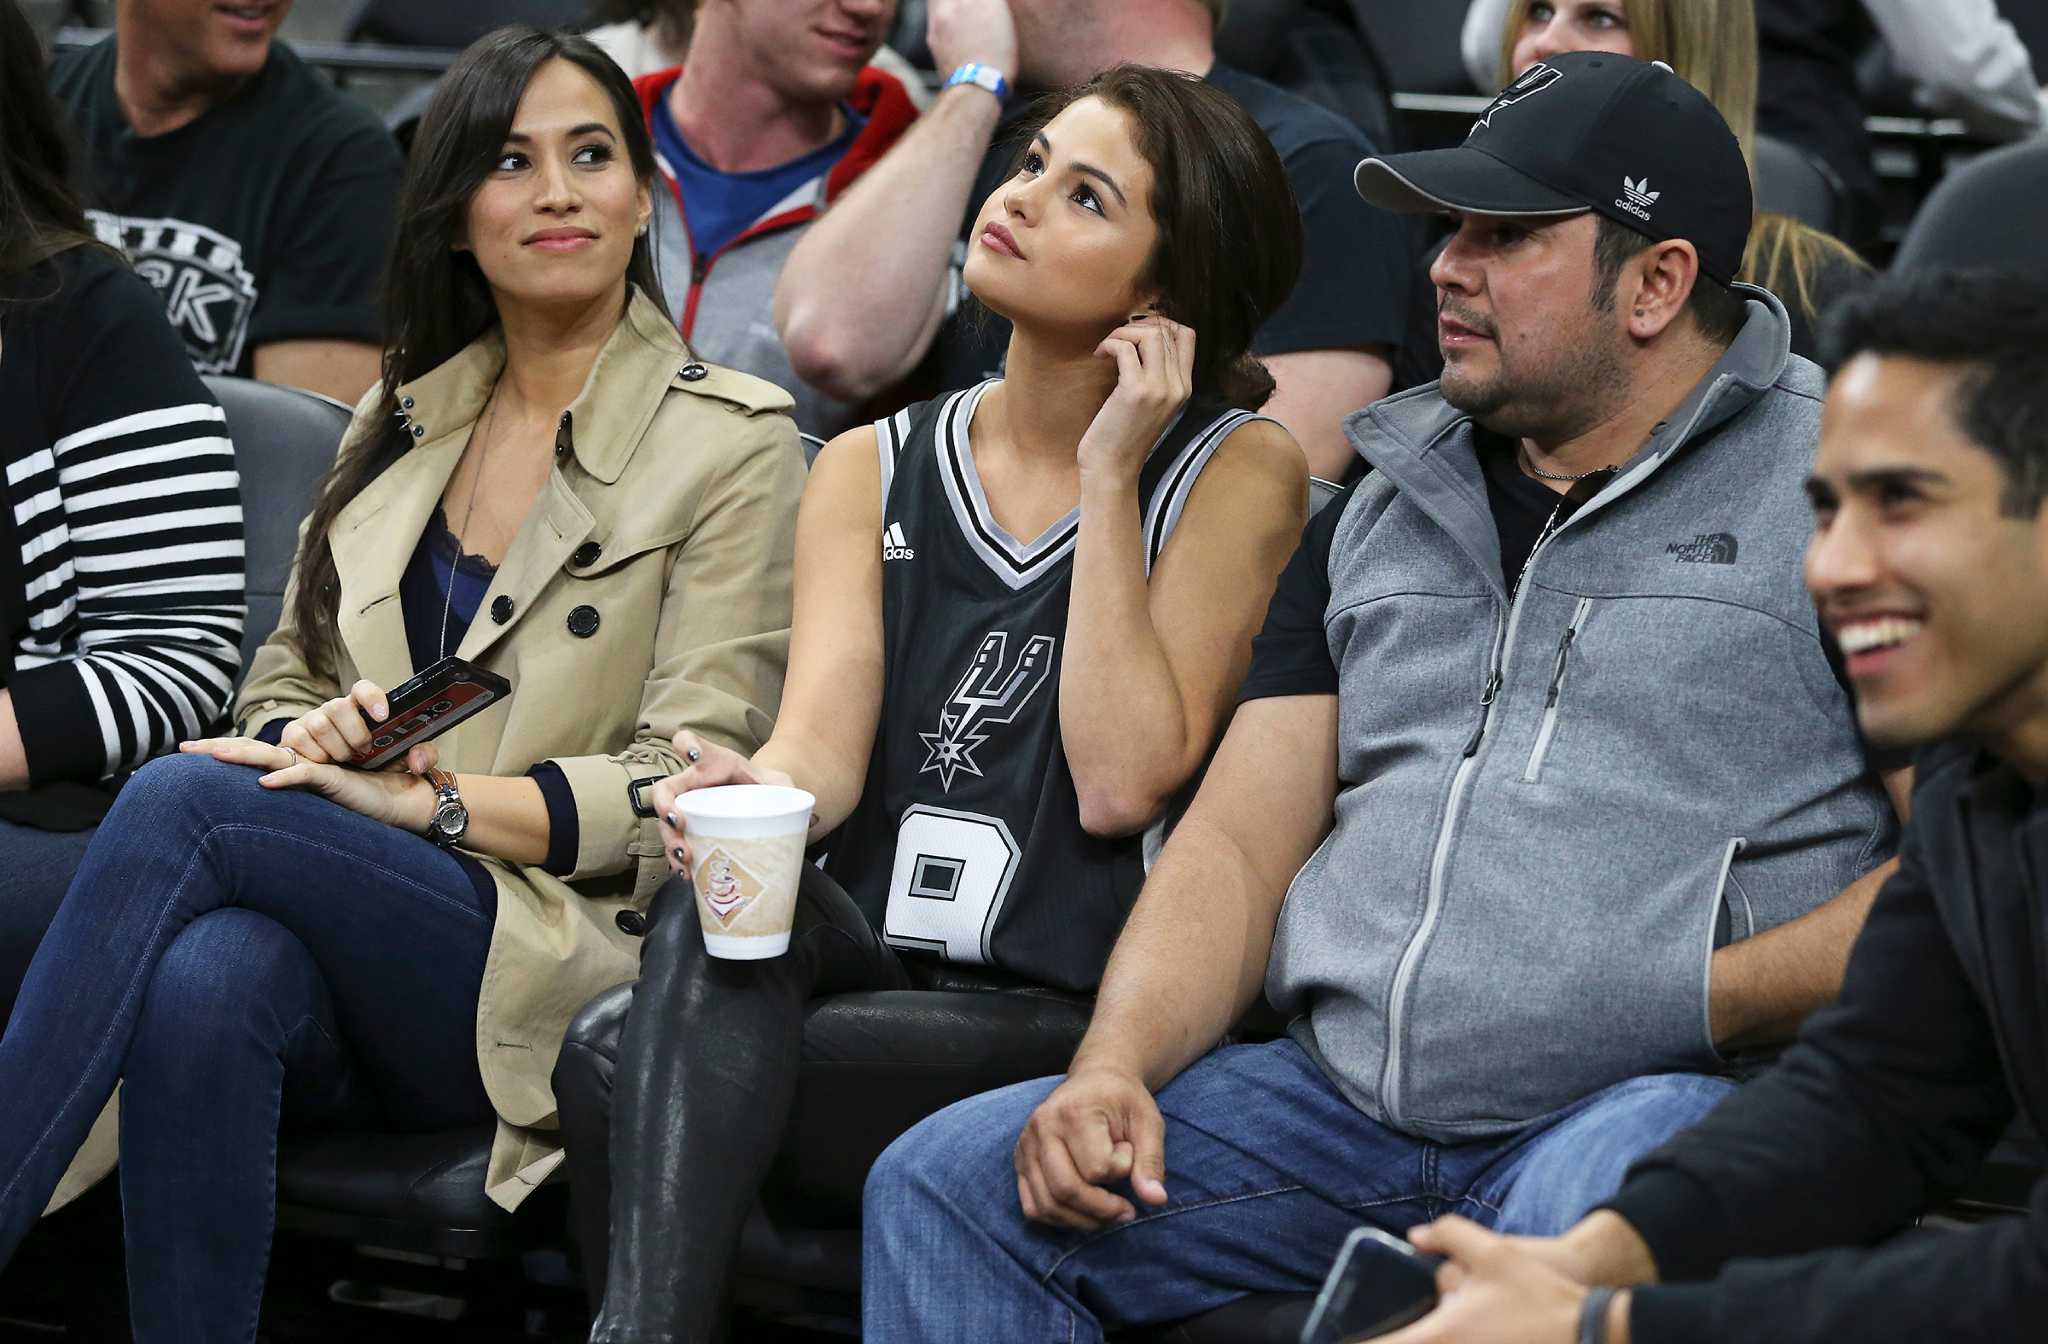 Selena with a fan at Spurs vs Lakes game